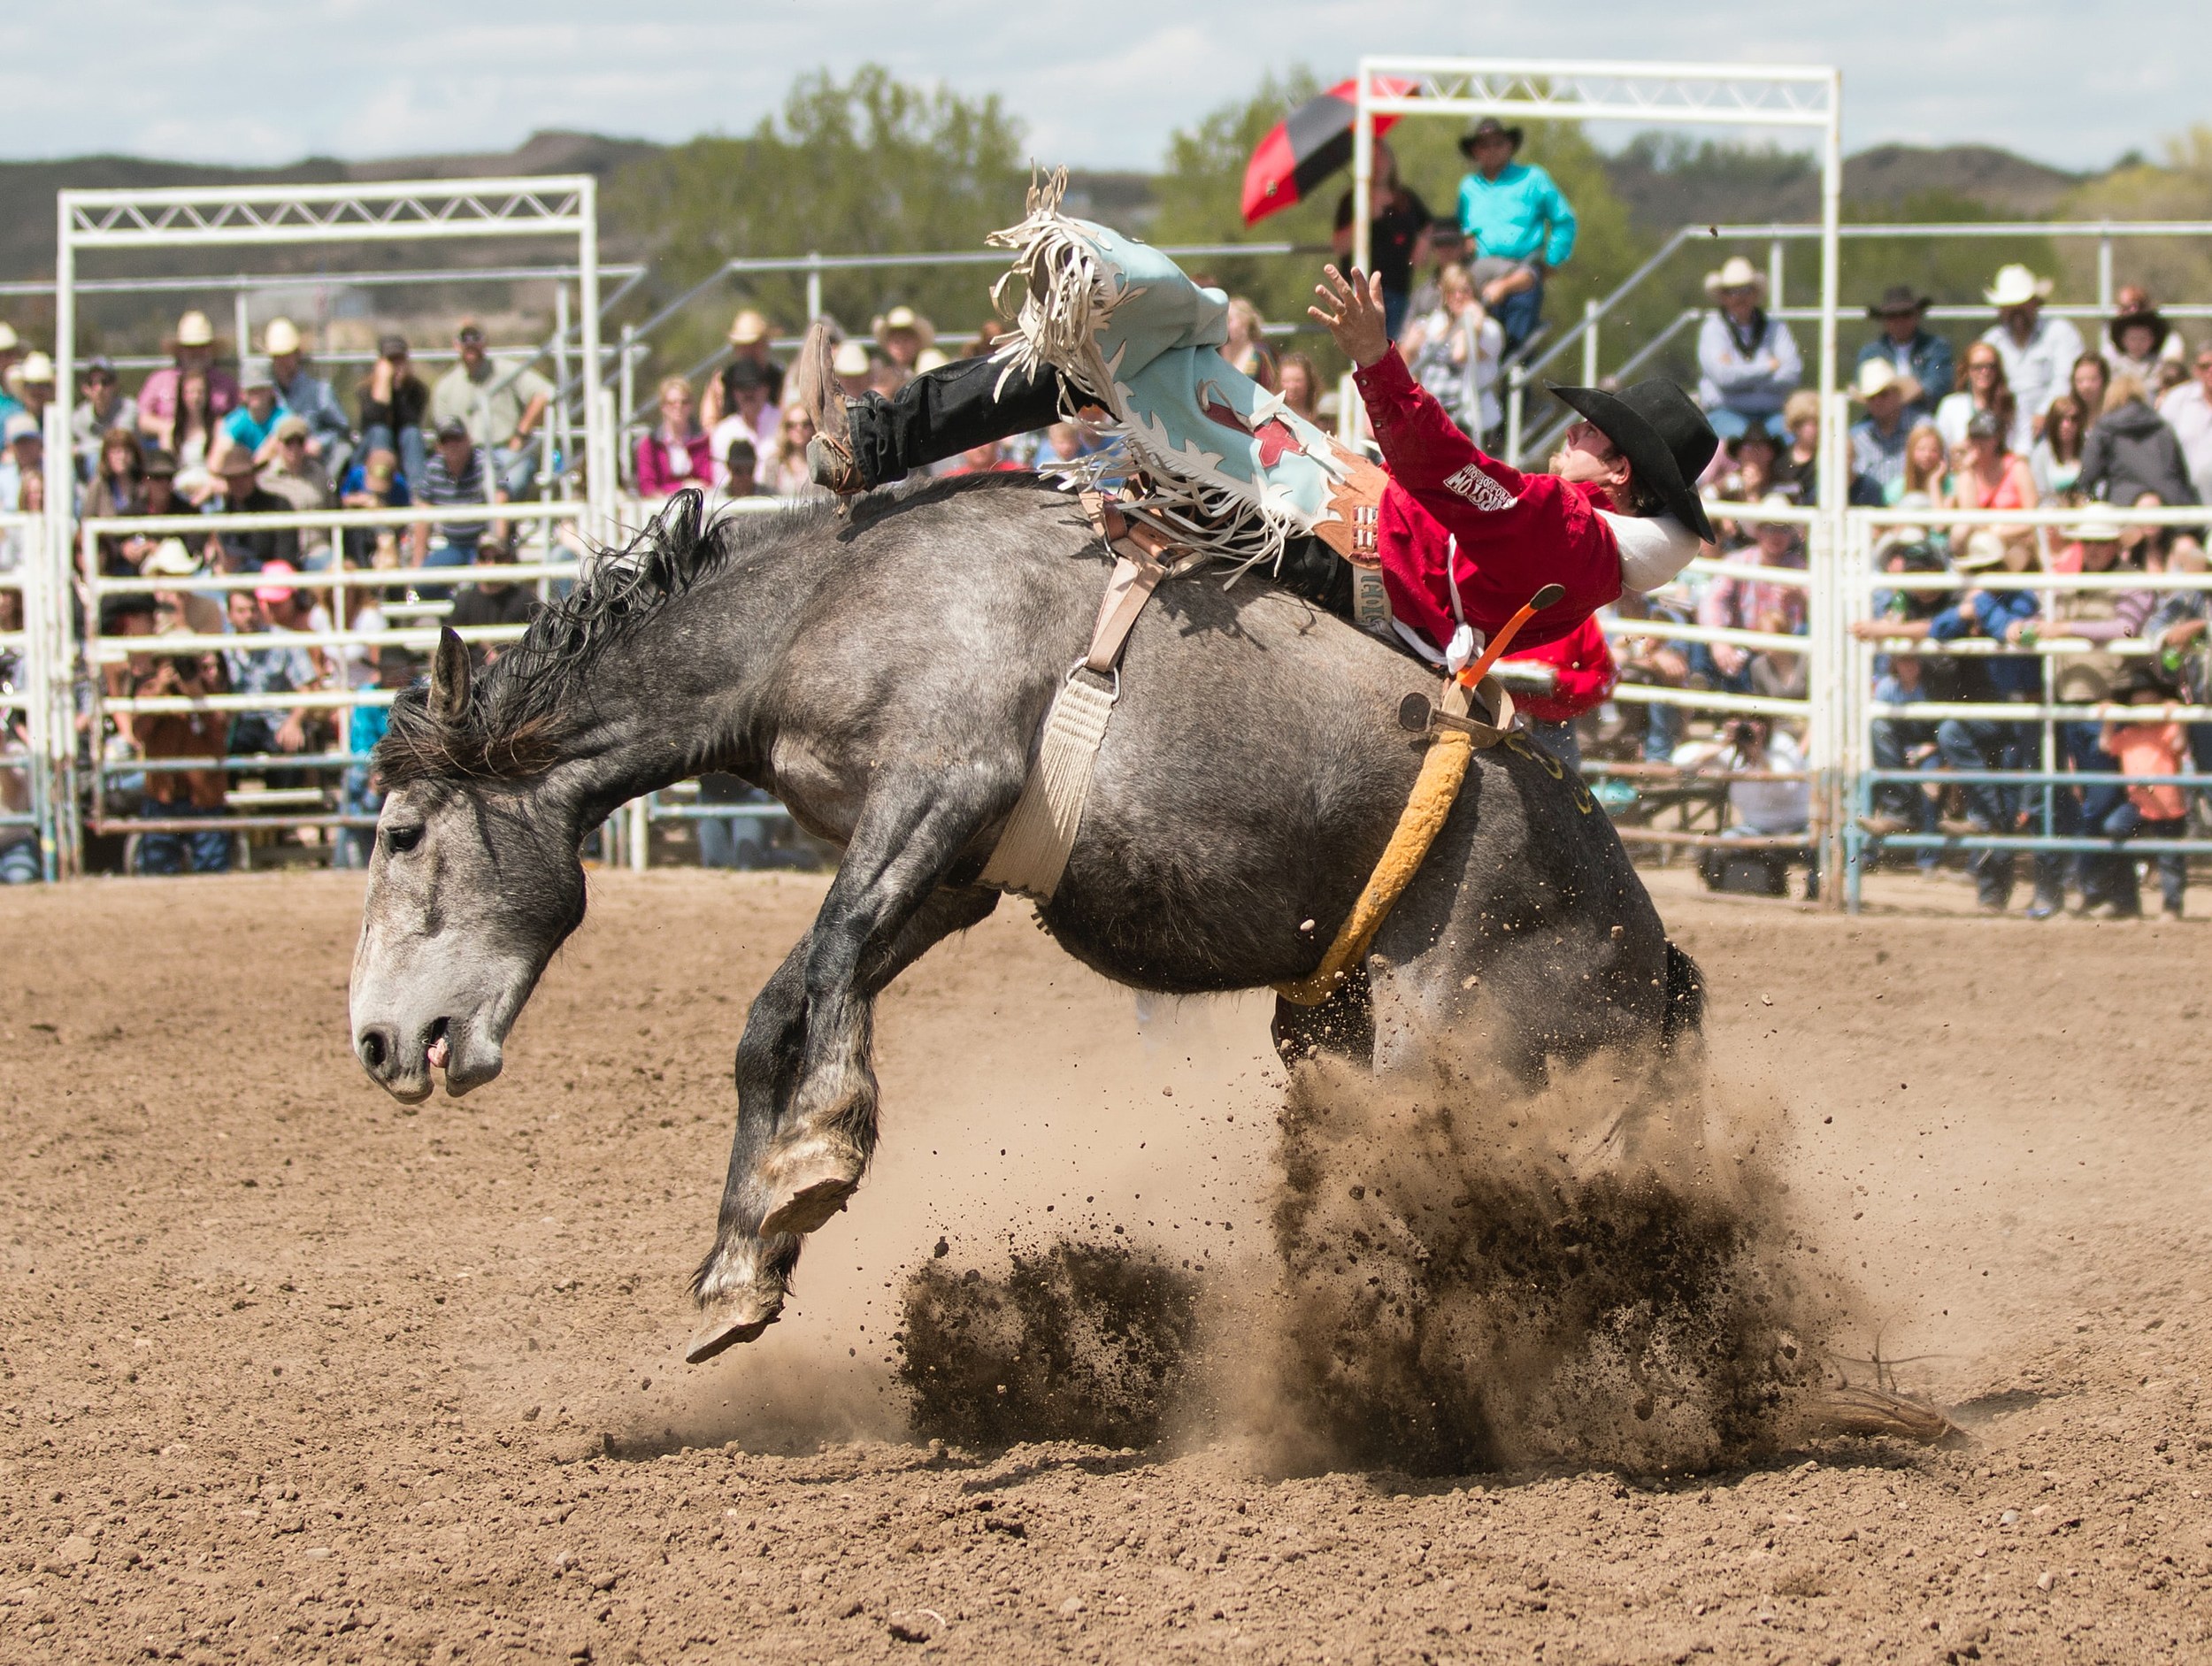 Clearwater's 35th Annual Rodeo Offers Fun For Cowboys and Cowgirls of